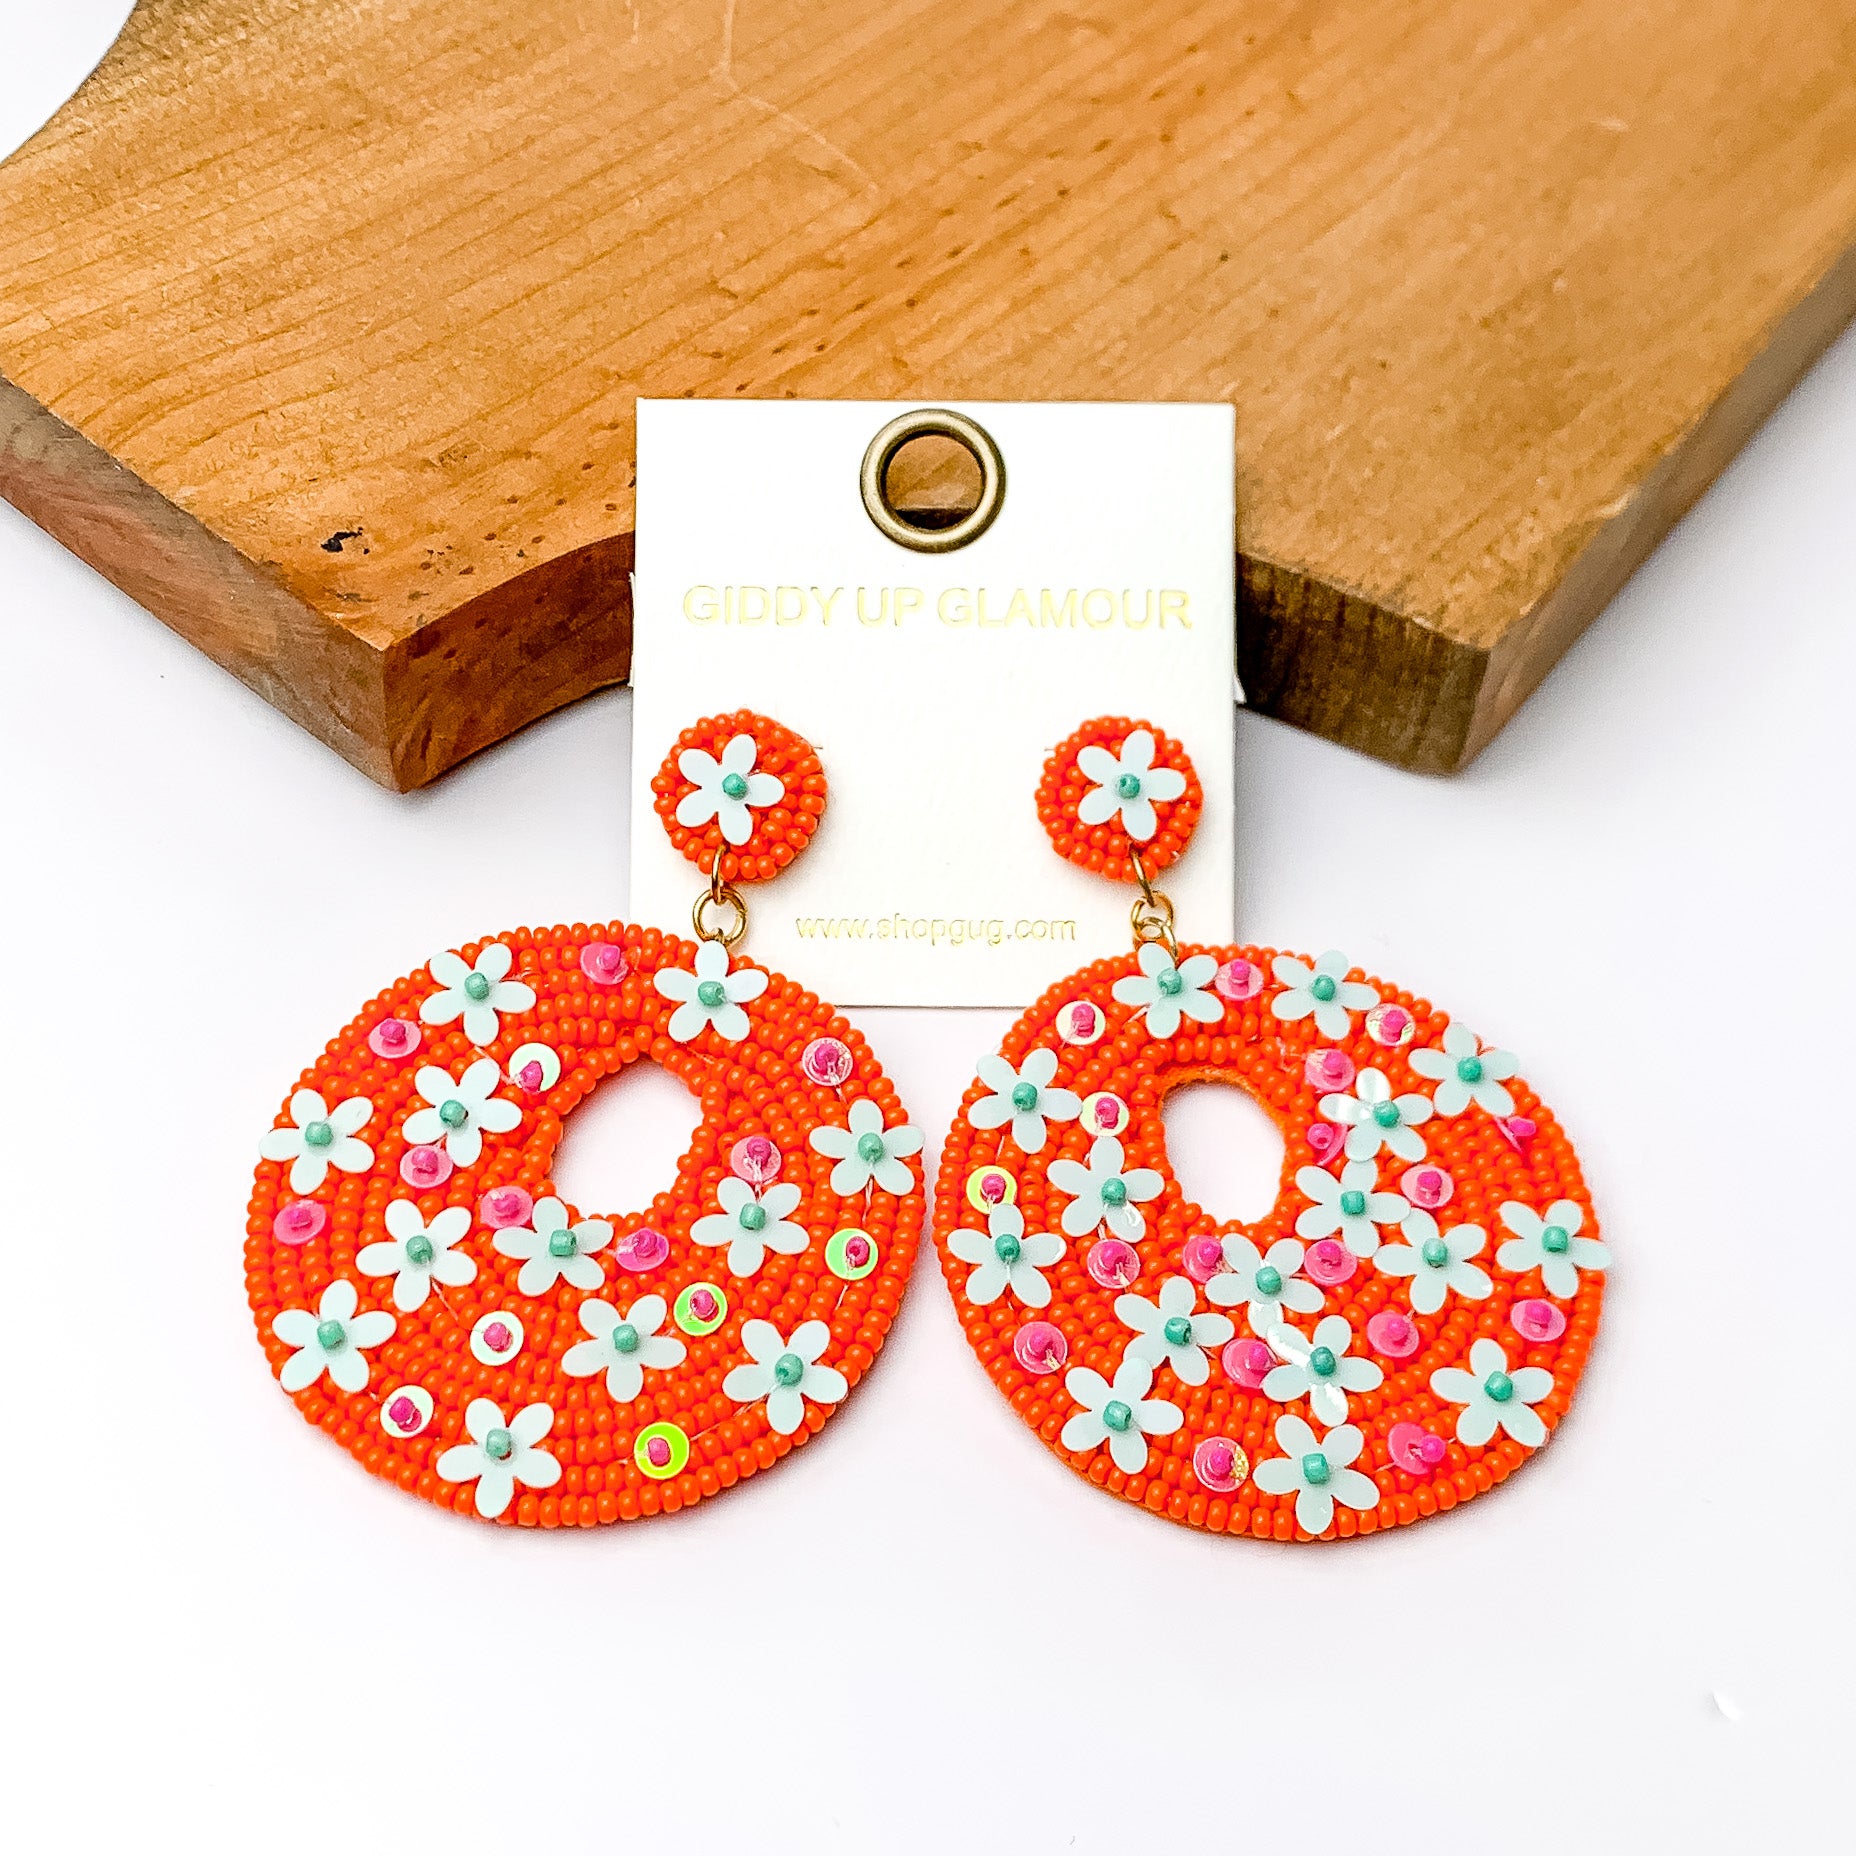 Orange beaded circular drop earrings with pink and blue designs. Pictured on a white background with a wood piece at the top.